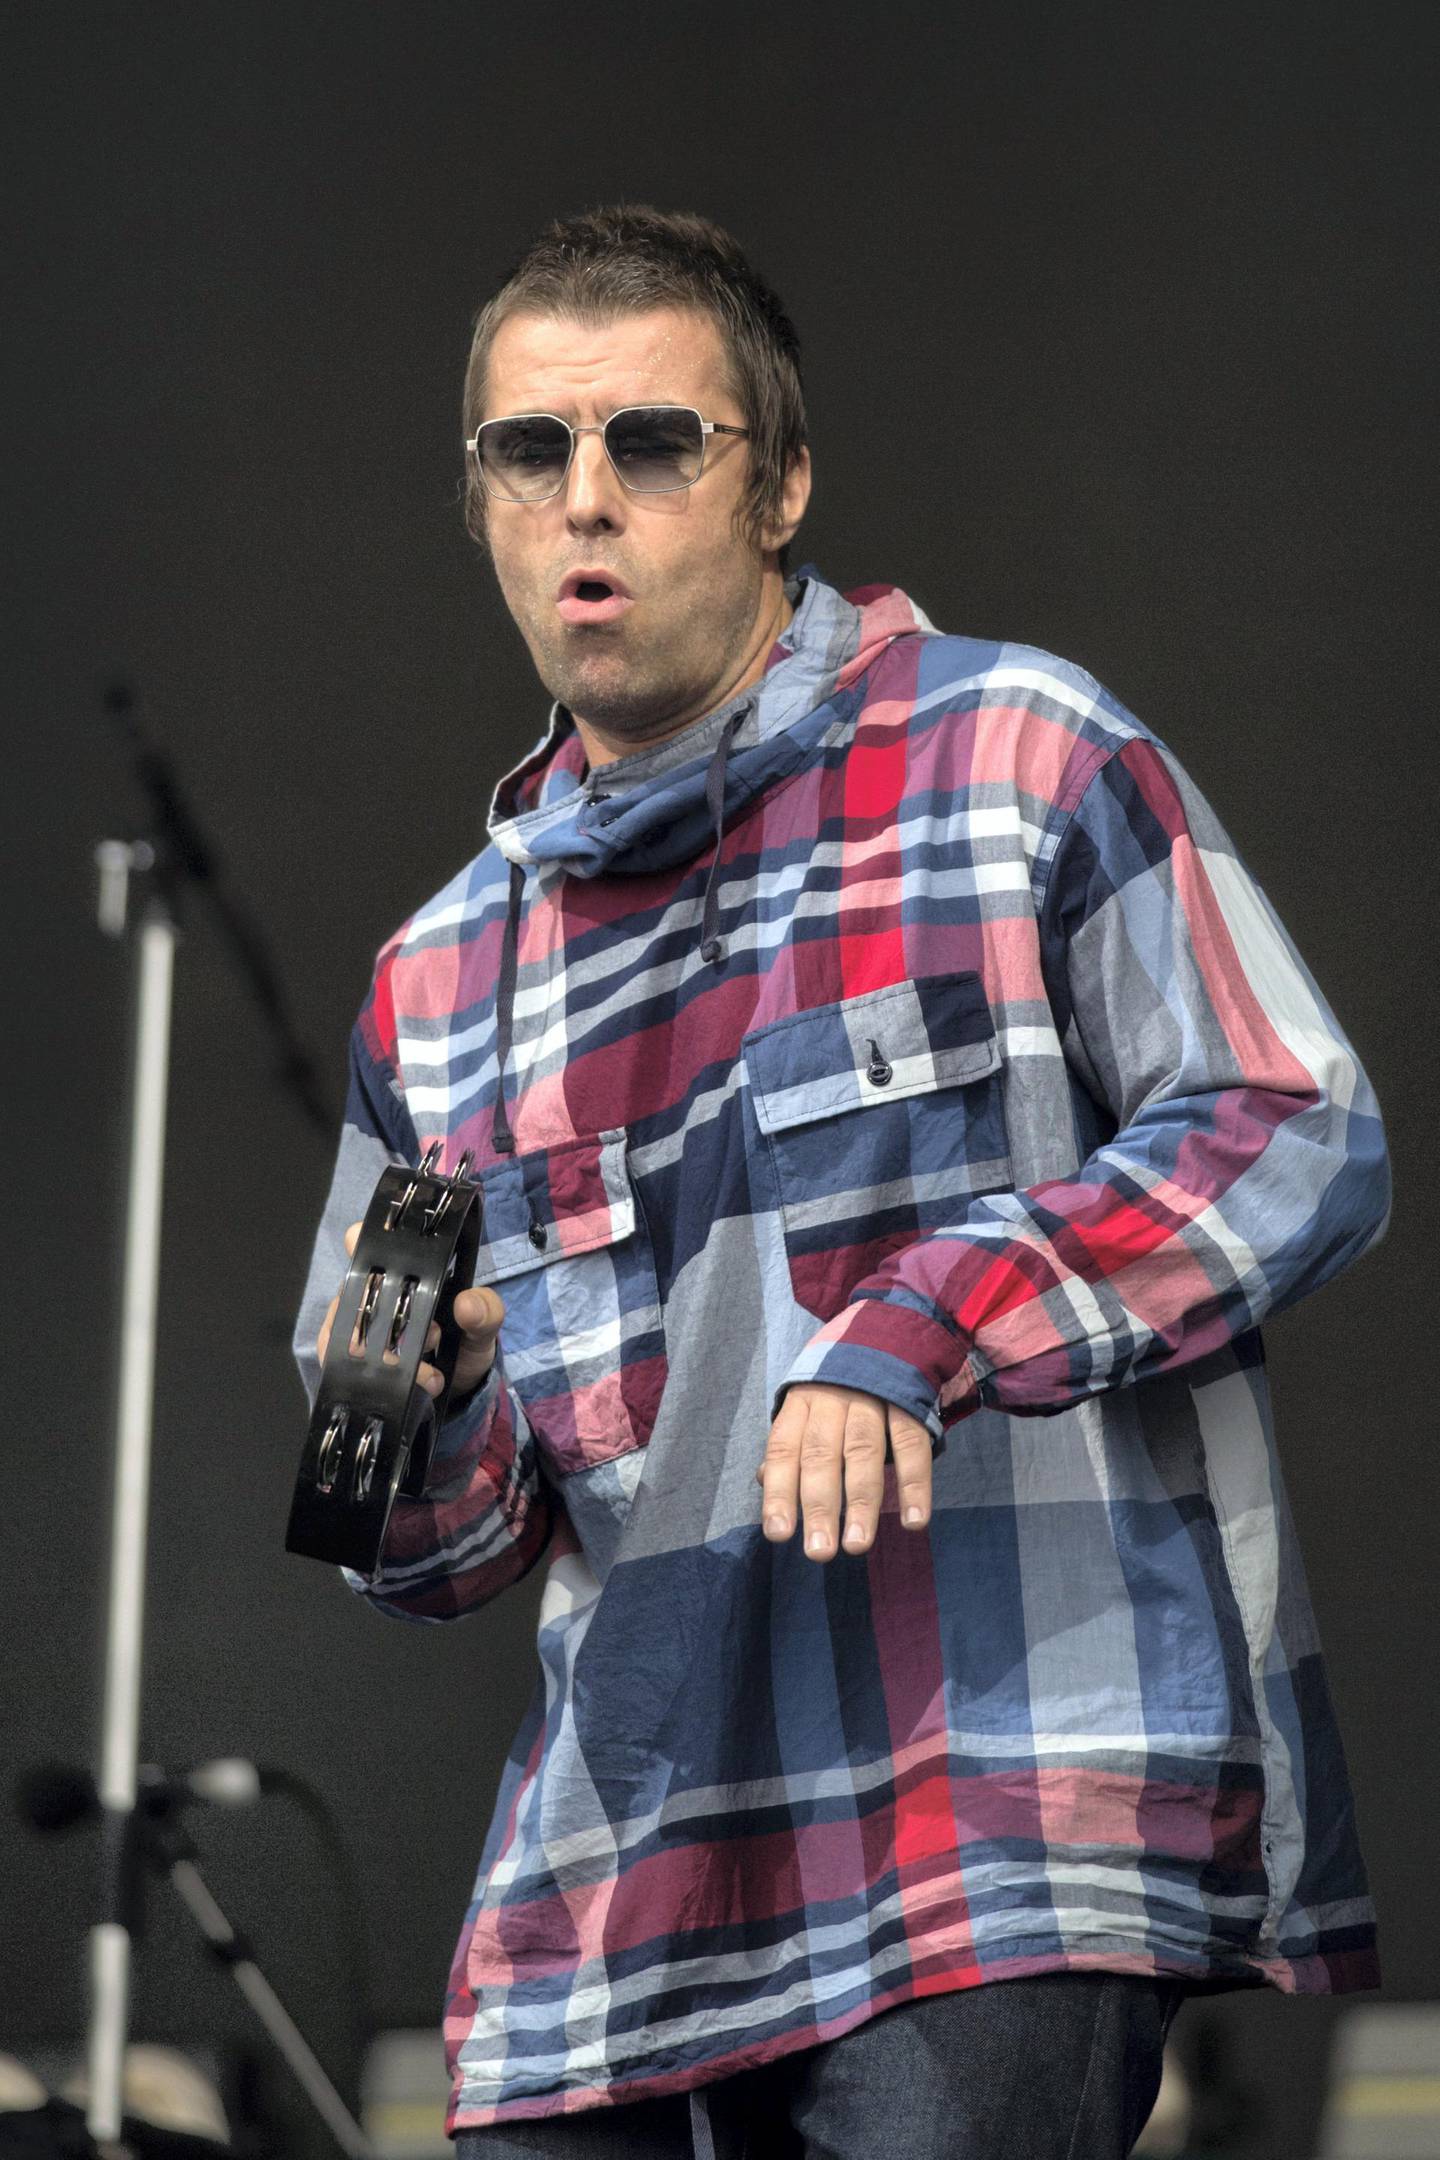 British singer Liam Gallagher performs on the Pyramid Stage at the Glastonbury Festival of Music and Performing Arts on Worthy Farm near the village of Pilton in Somerset, South West England, on June 29, 2019. (Photo by Oli SCARFF / AFP)